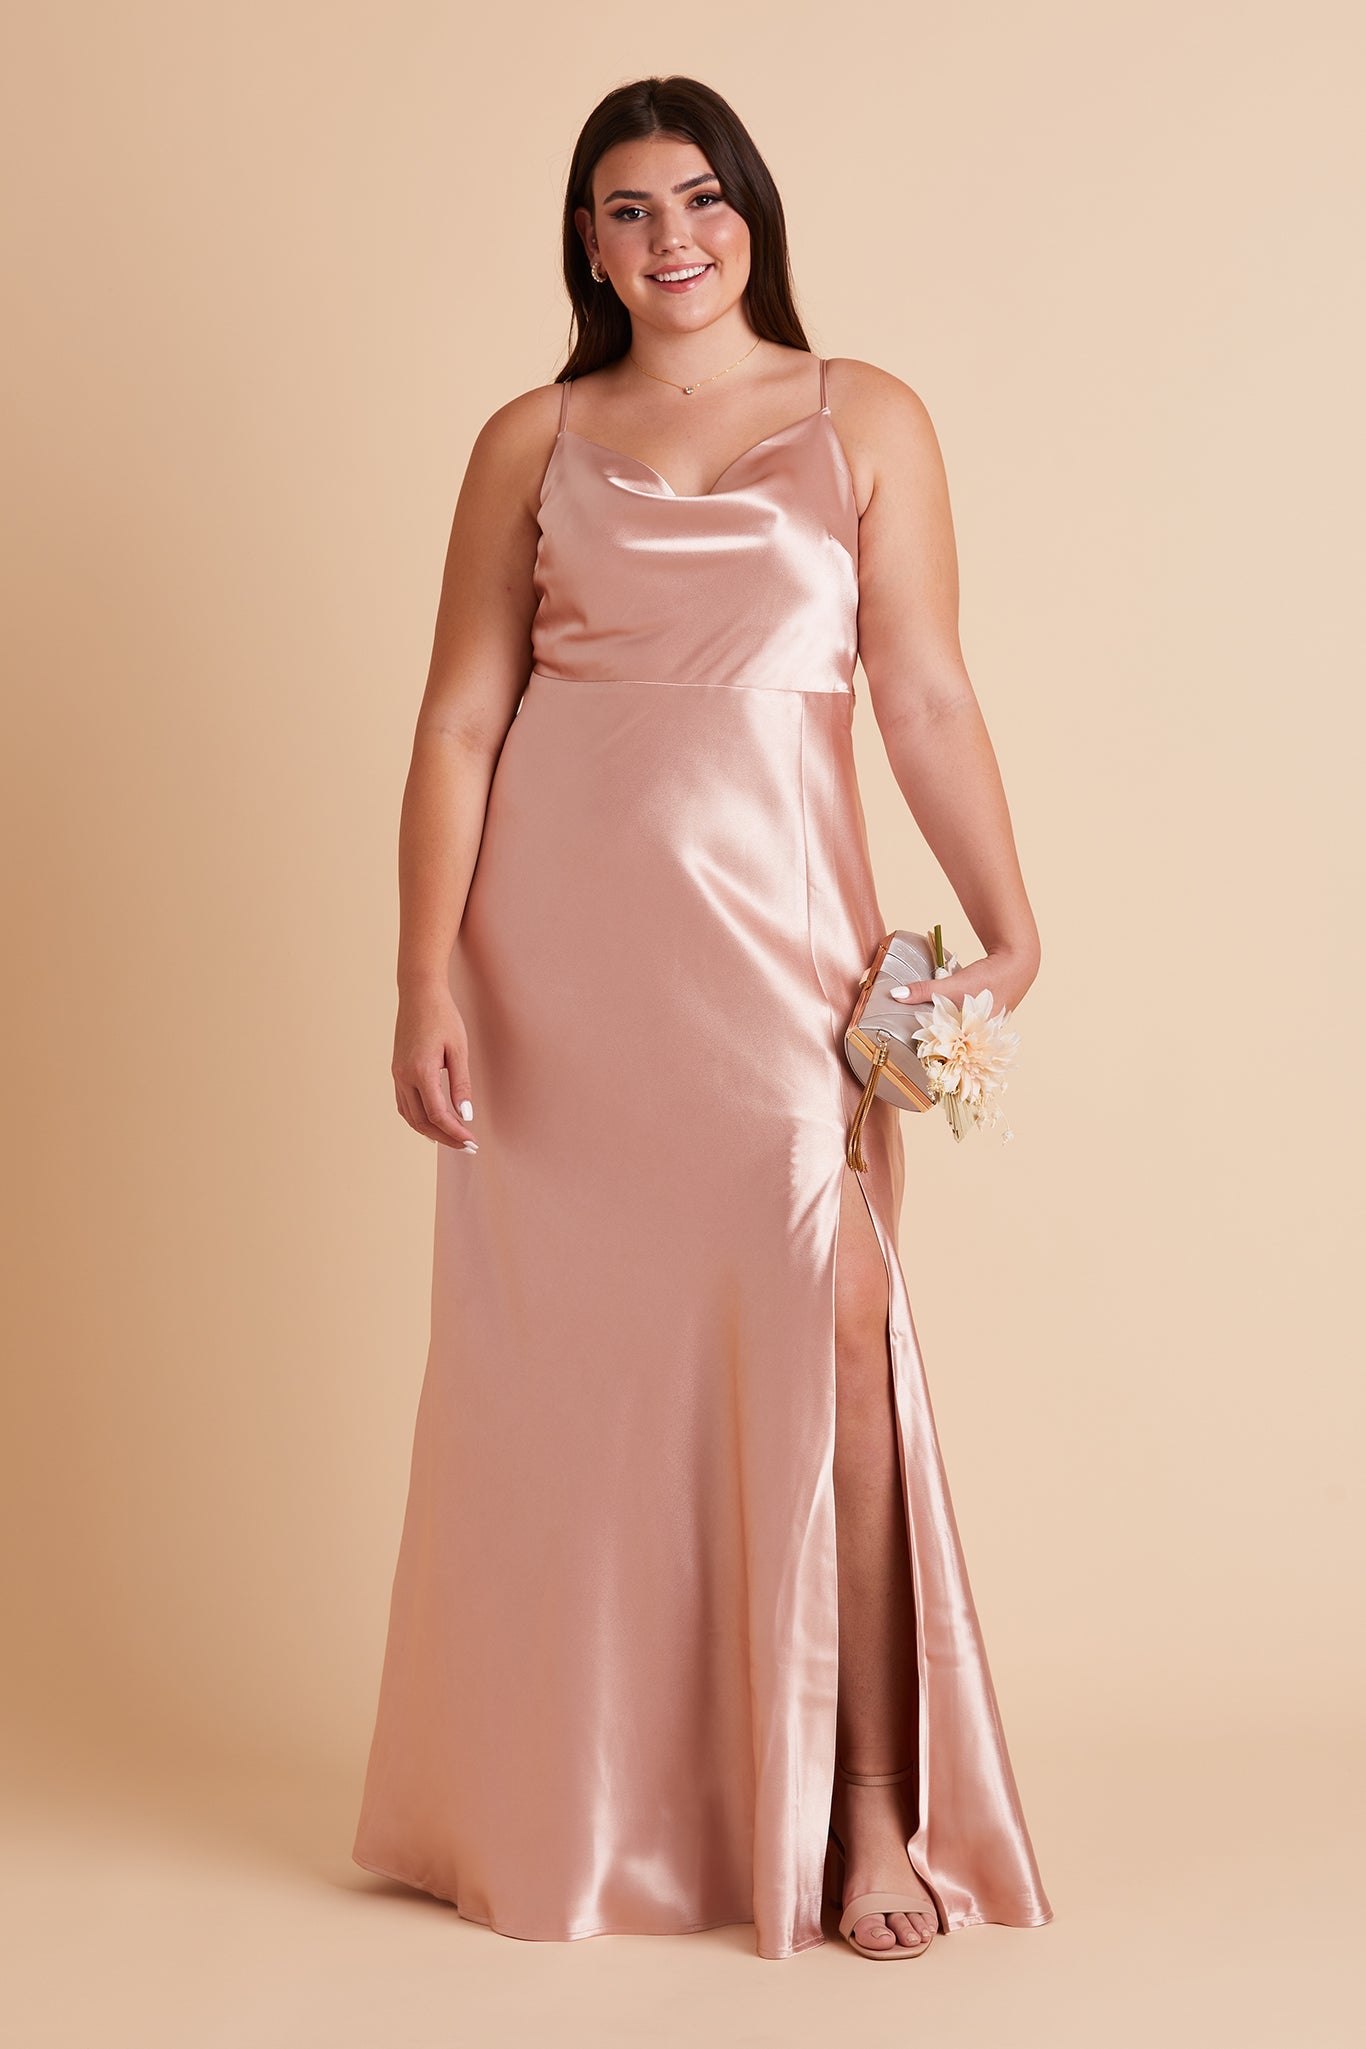 Front view of the Lisa Long Dress Curve Plus Size in rose gold satin shows a model revealing their leg and foot in a strappy heel in the mid-thigh dress slit. 